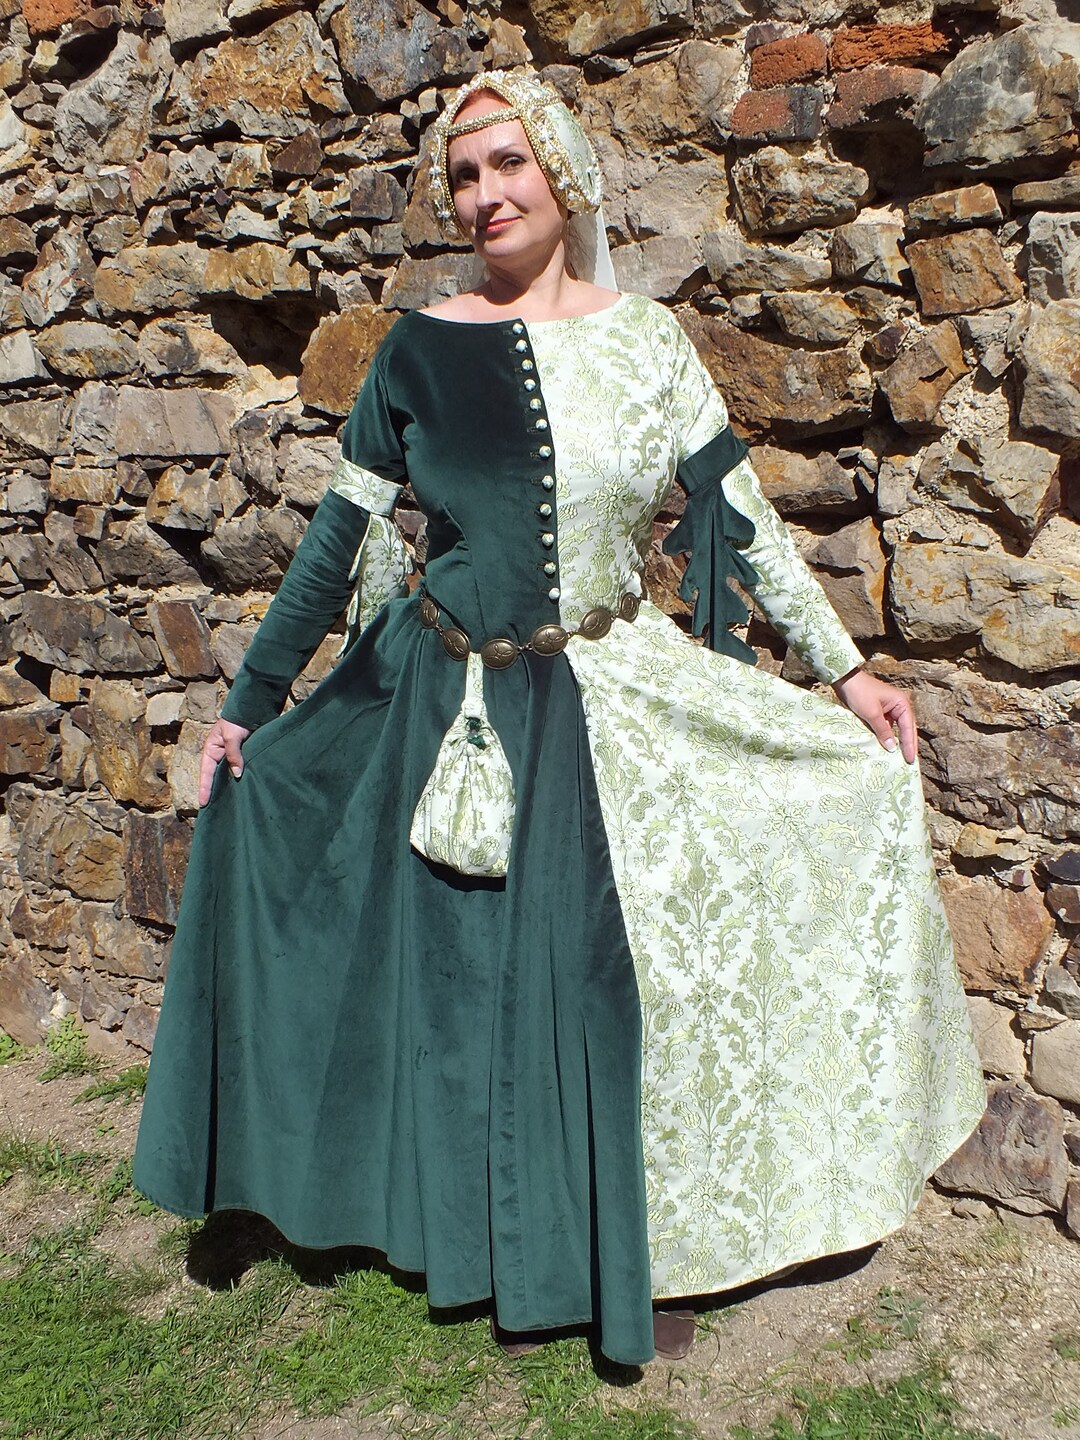 Medieval Woman Dress, Medieval Dress, Historical Costume, Historical ...